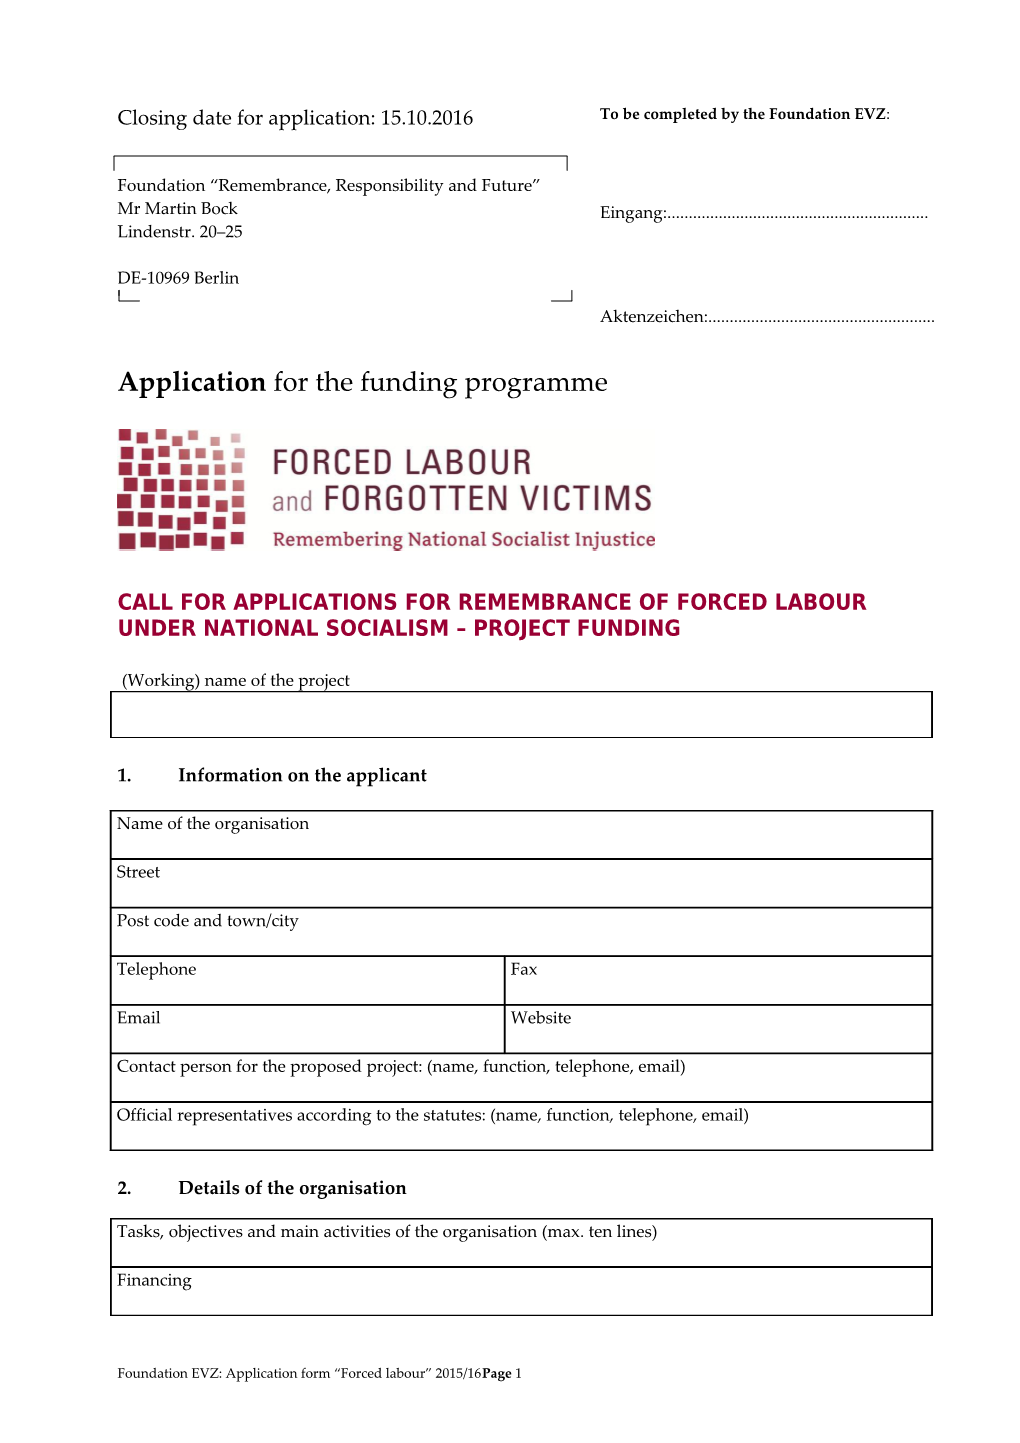 Application for the Funding Programme